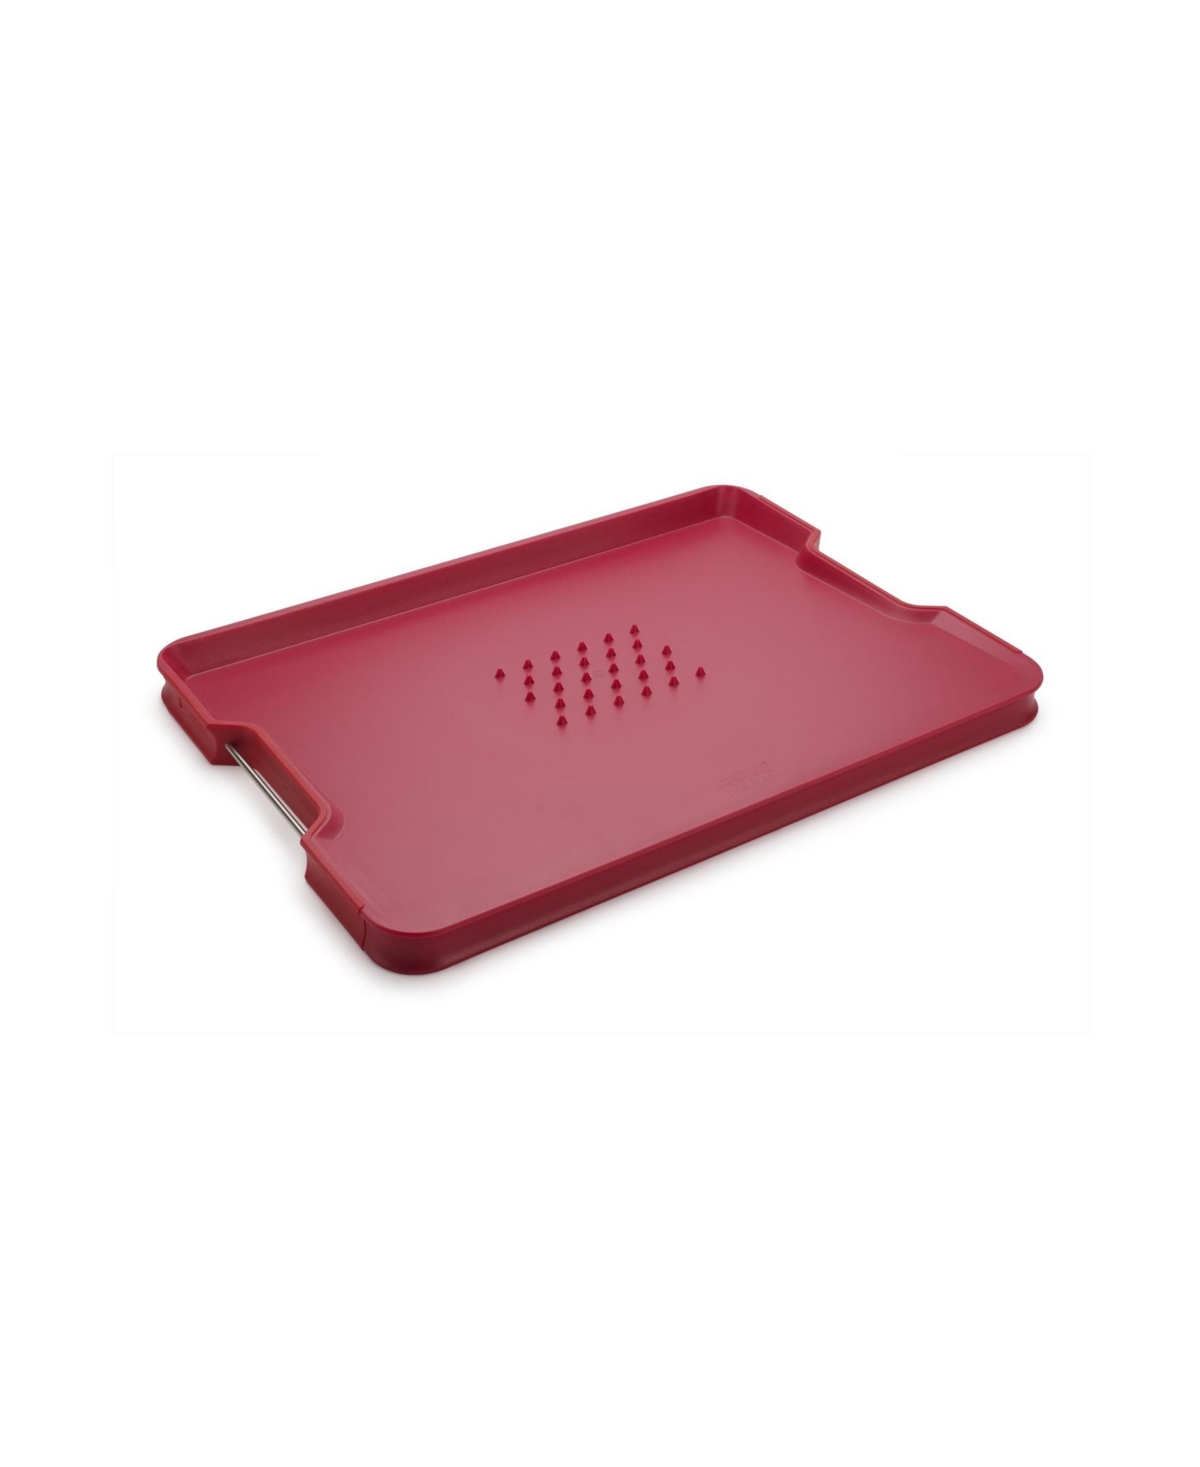 Joseph Joseph Cut And Carve Plus Multi-function Large Chopping Board In Red